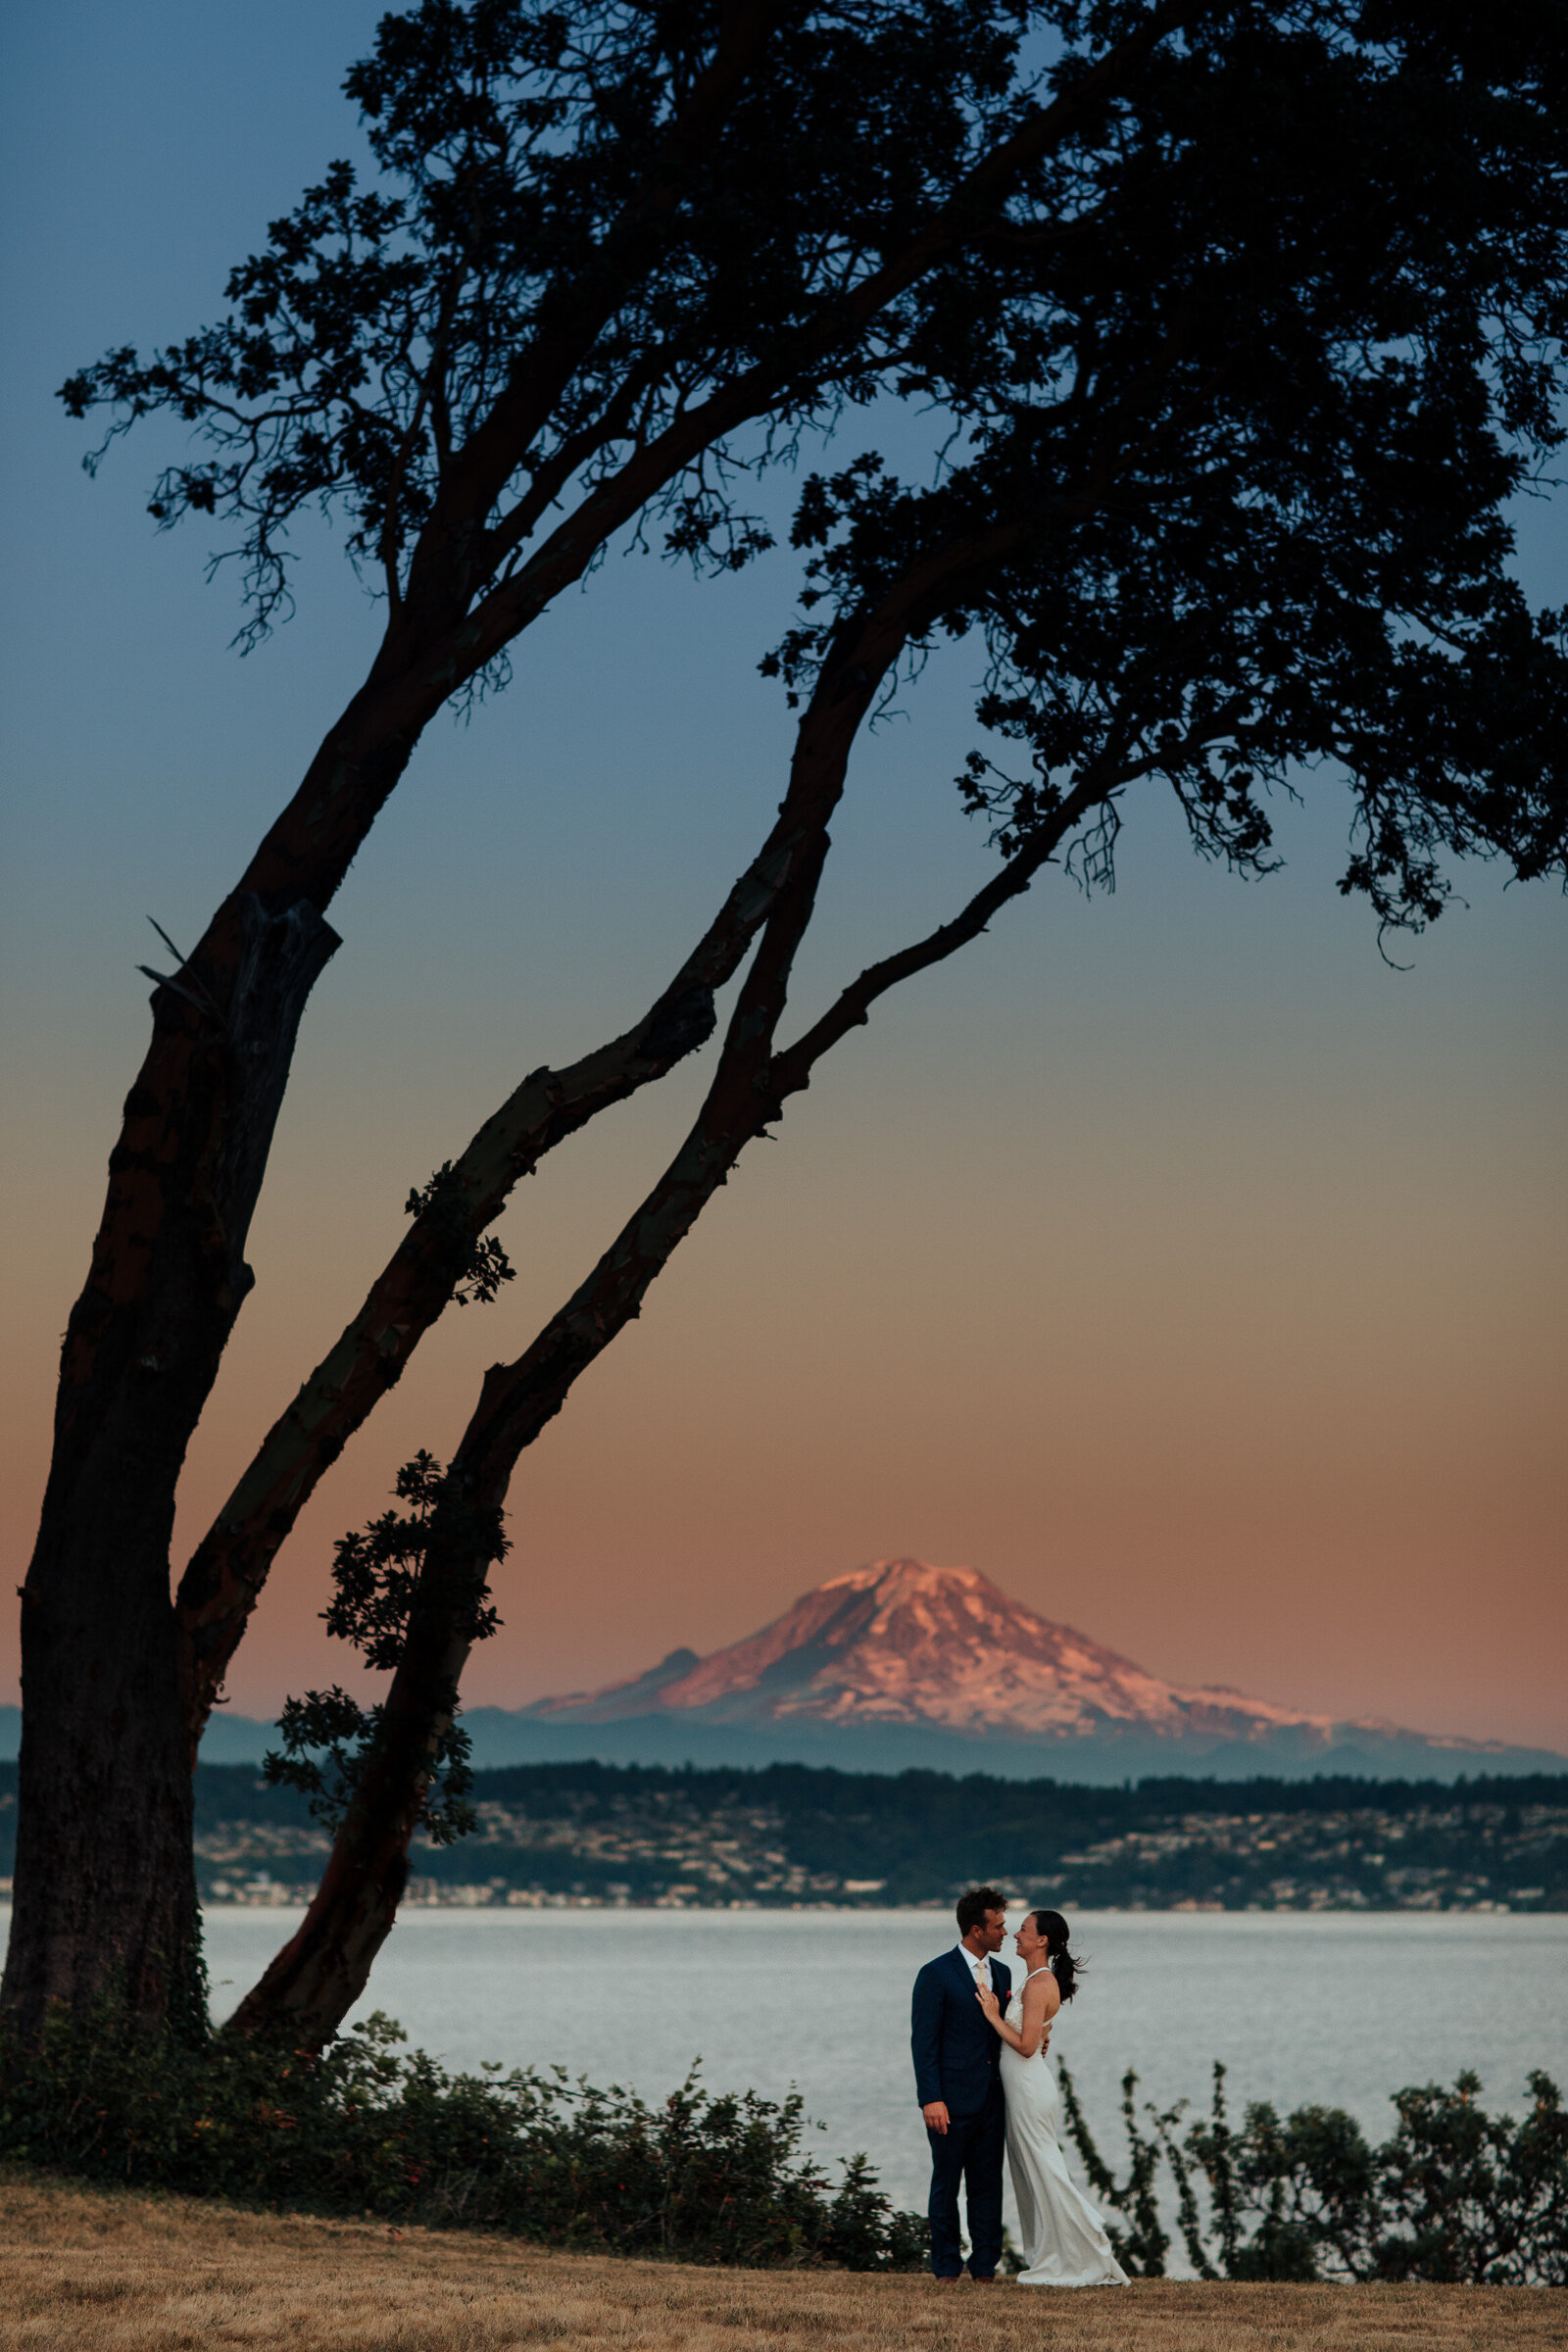 Bride and groom at Vashon waterfront  at sunset with Mount Rainier visible in the distant.